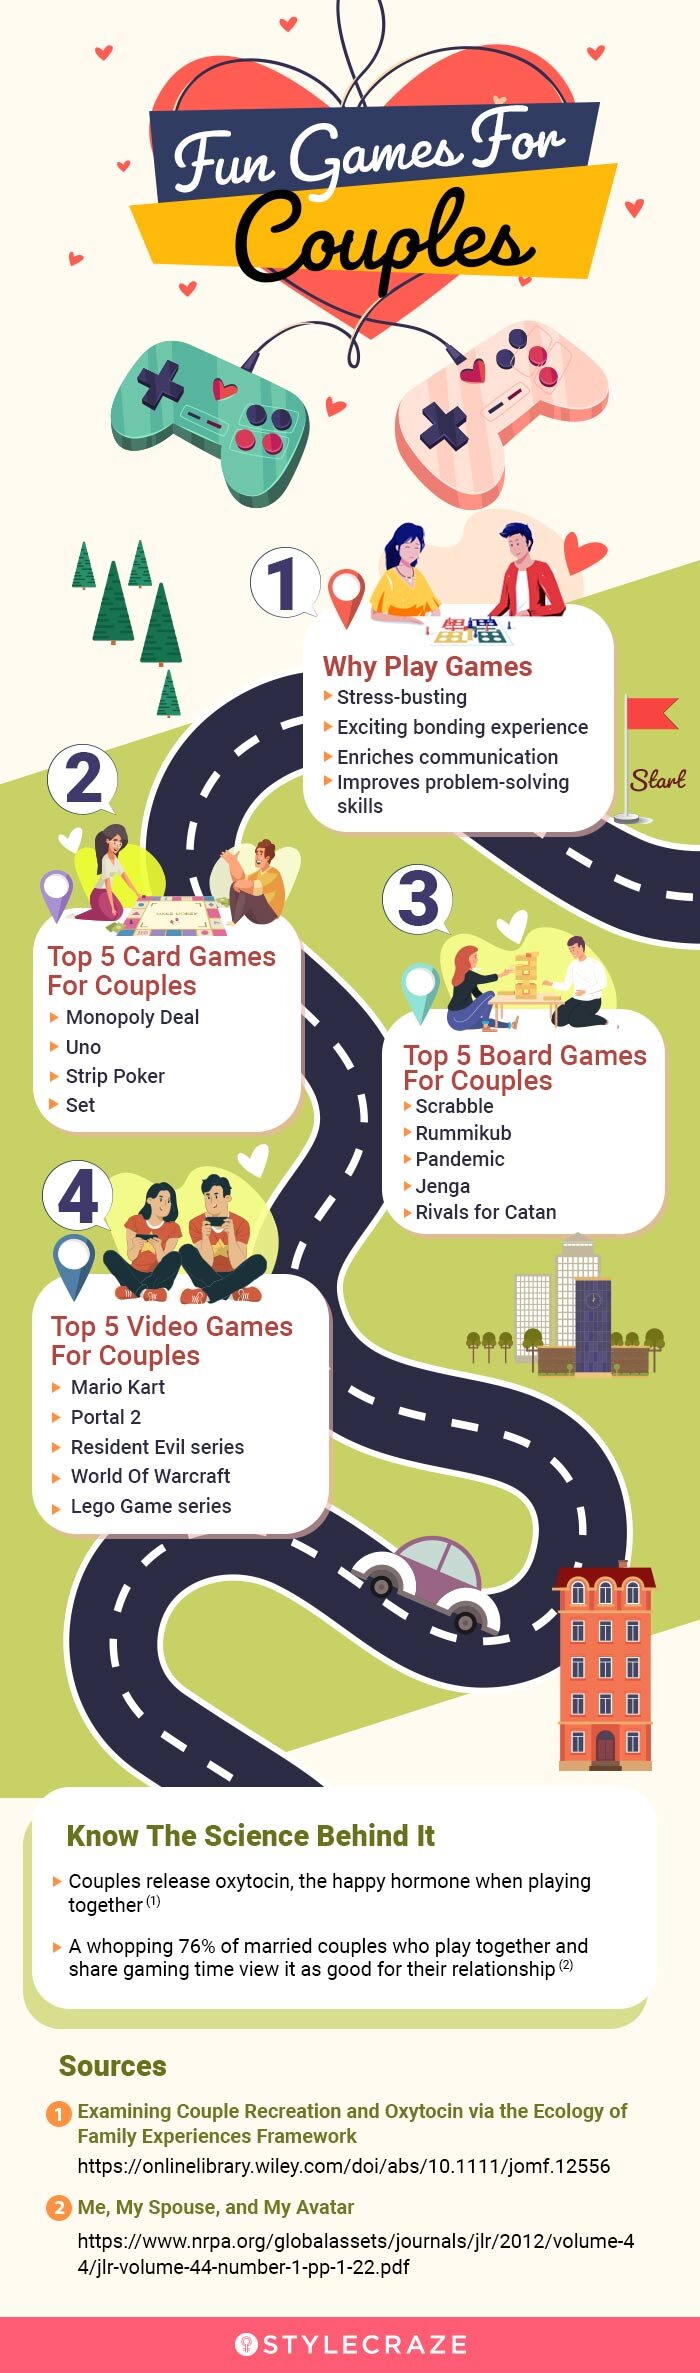 21 Best Fun Games For Couples